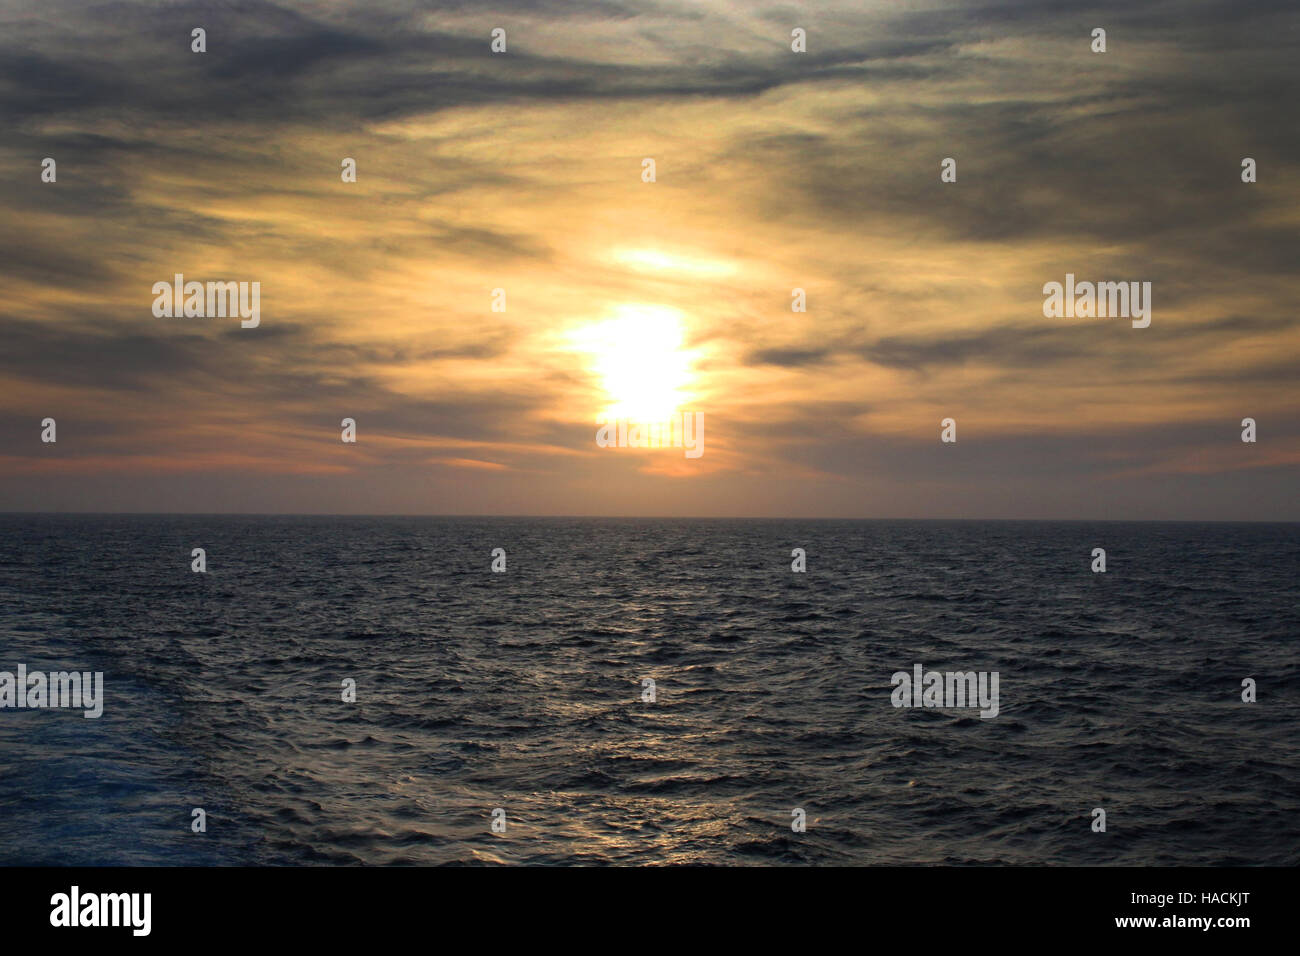 Sunset over the Ocean, off the coast of the Azores, Atlantic Ocean. Stock Photo